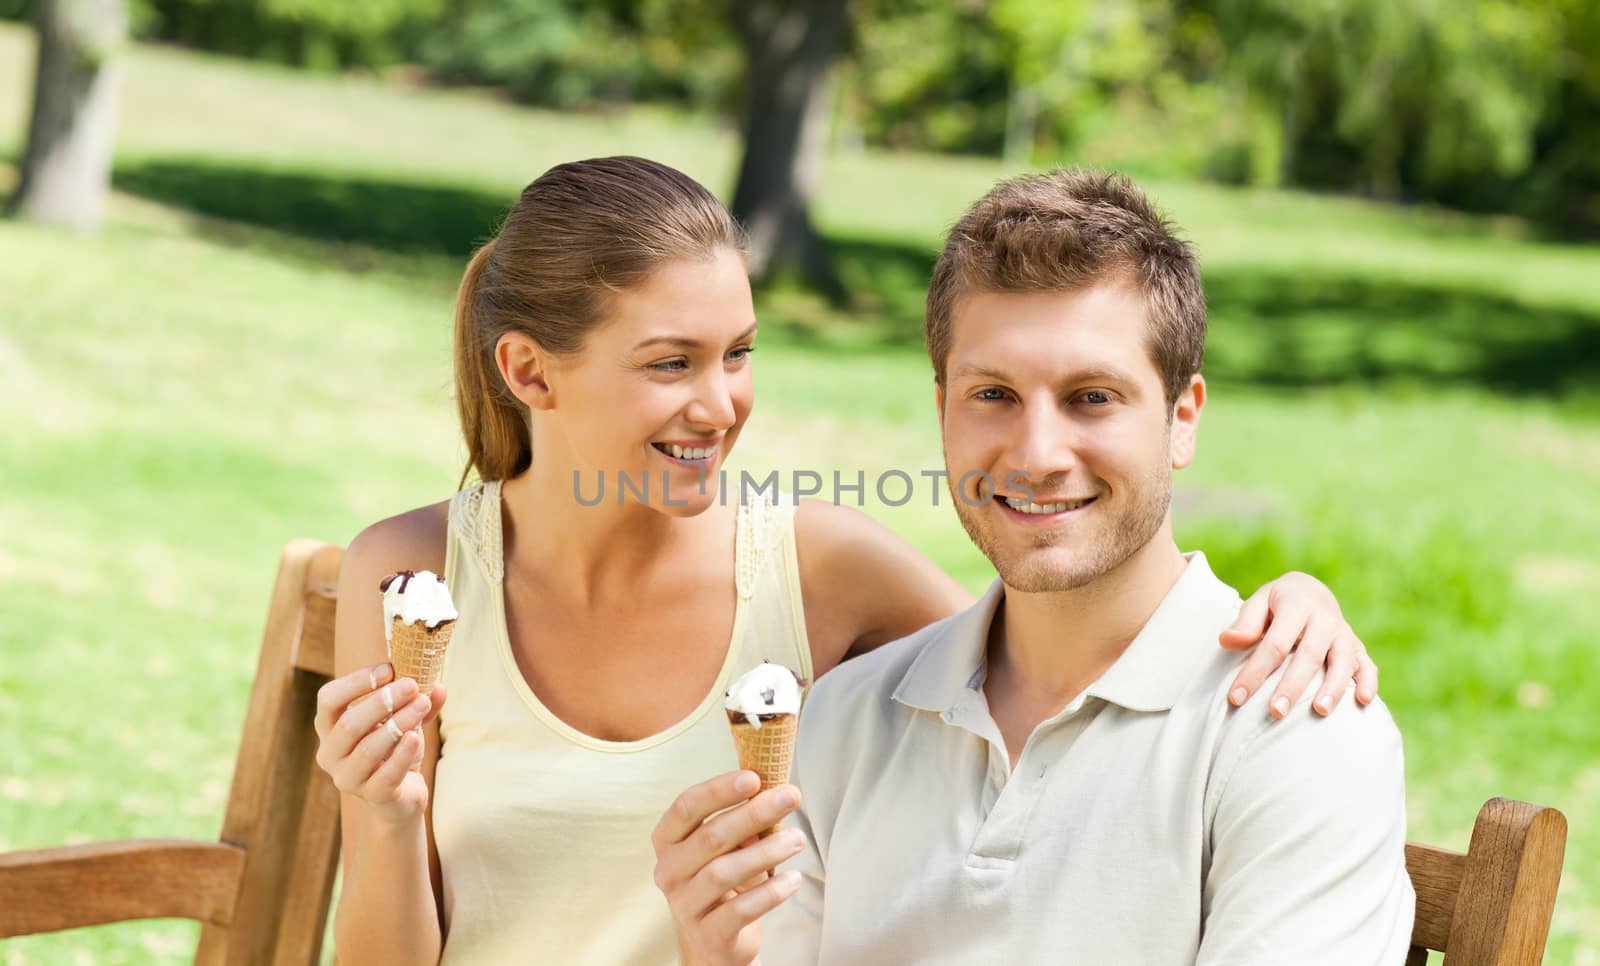 Couple eating an ice cream in the park by Wavebreakmedia